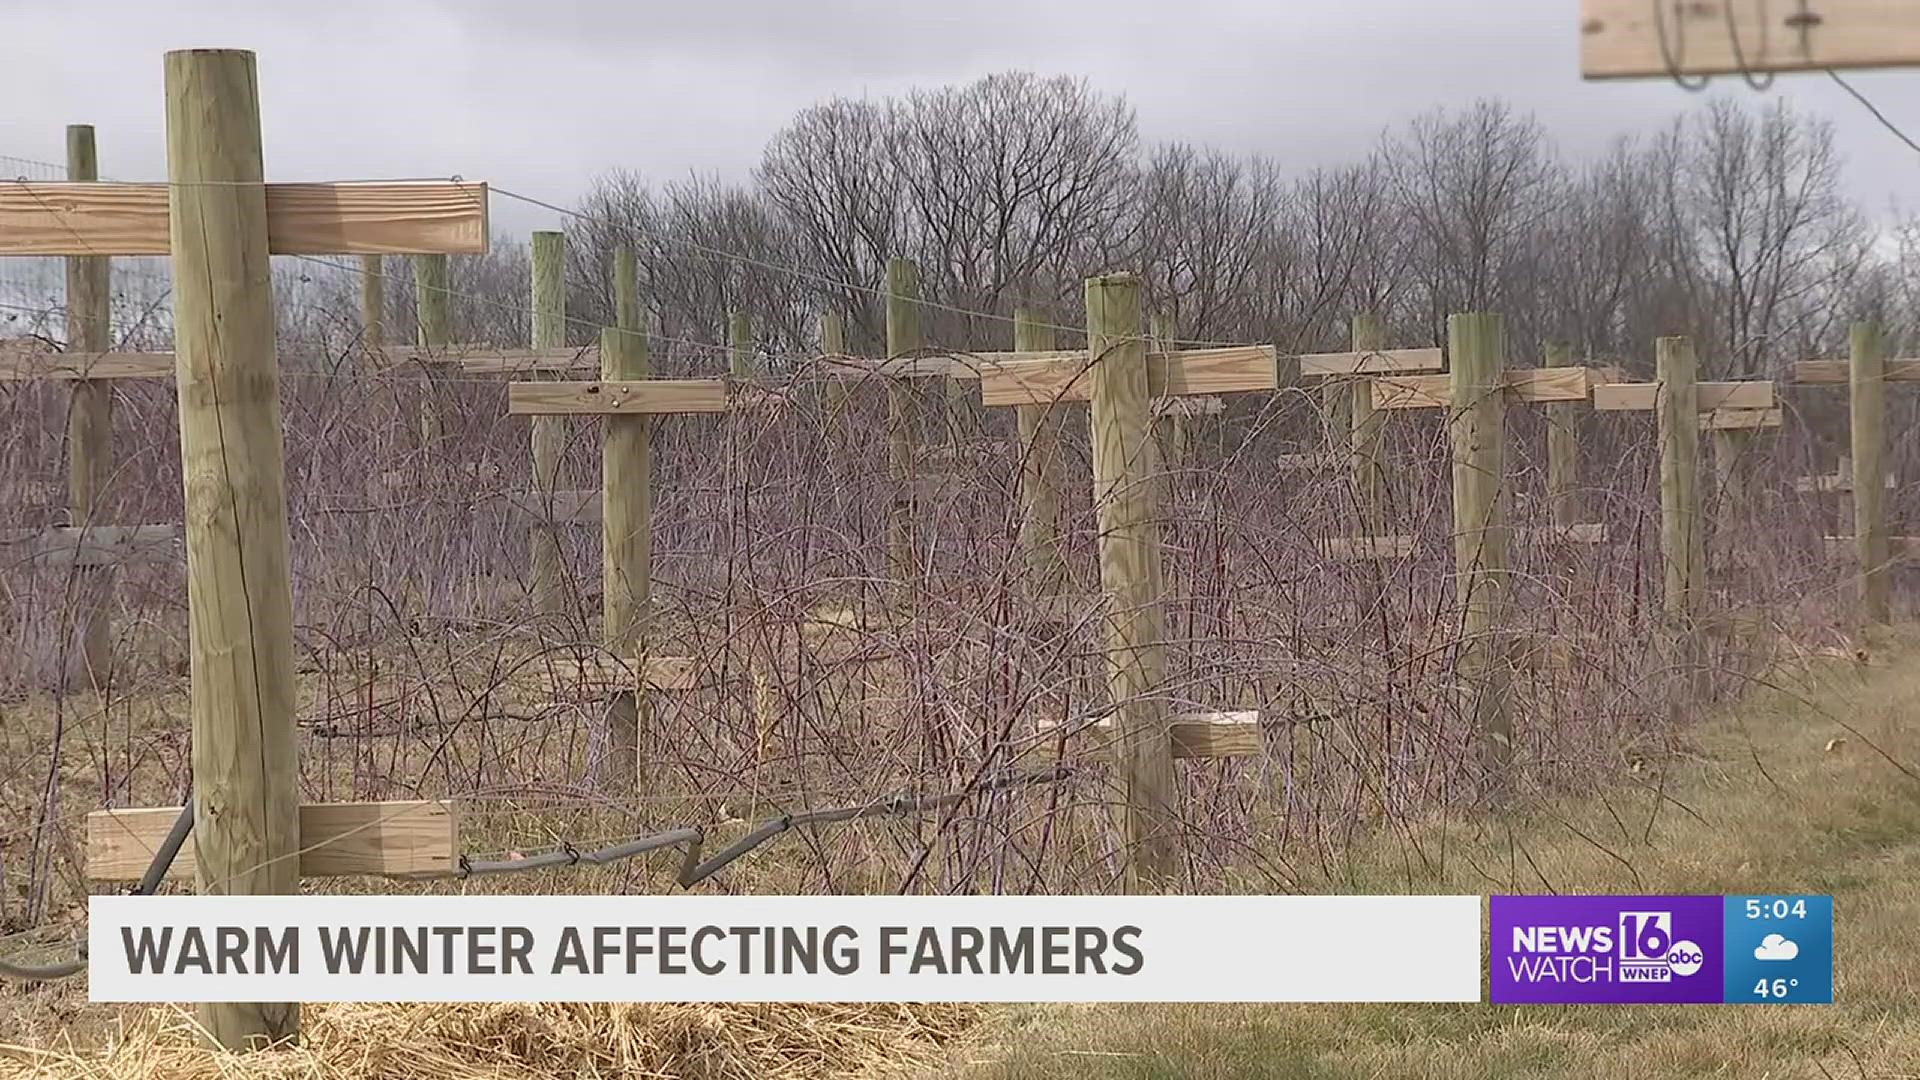 Farmers tell Newswatch 16 that fruit trees can handle the fluctuating temperatures but too much warm weather too early is a concern.